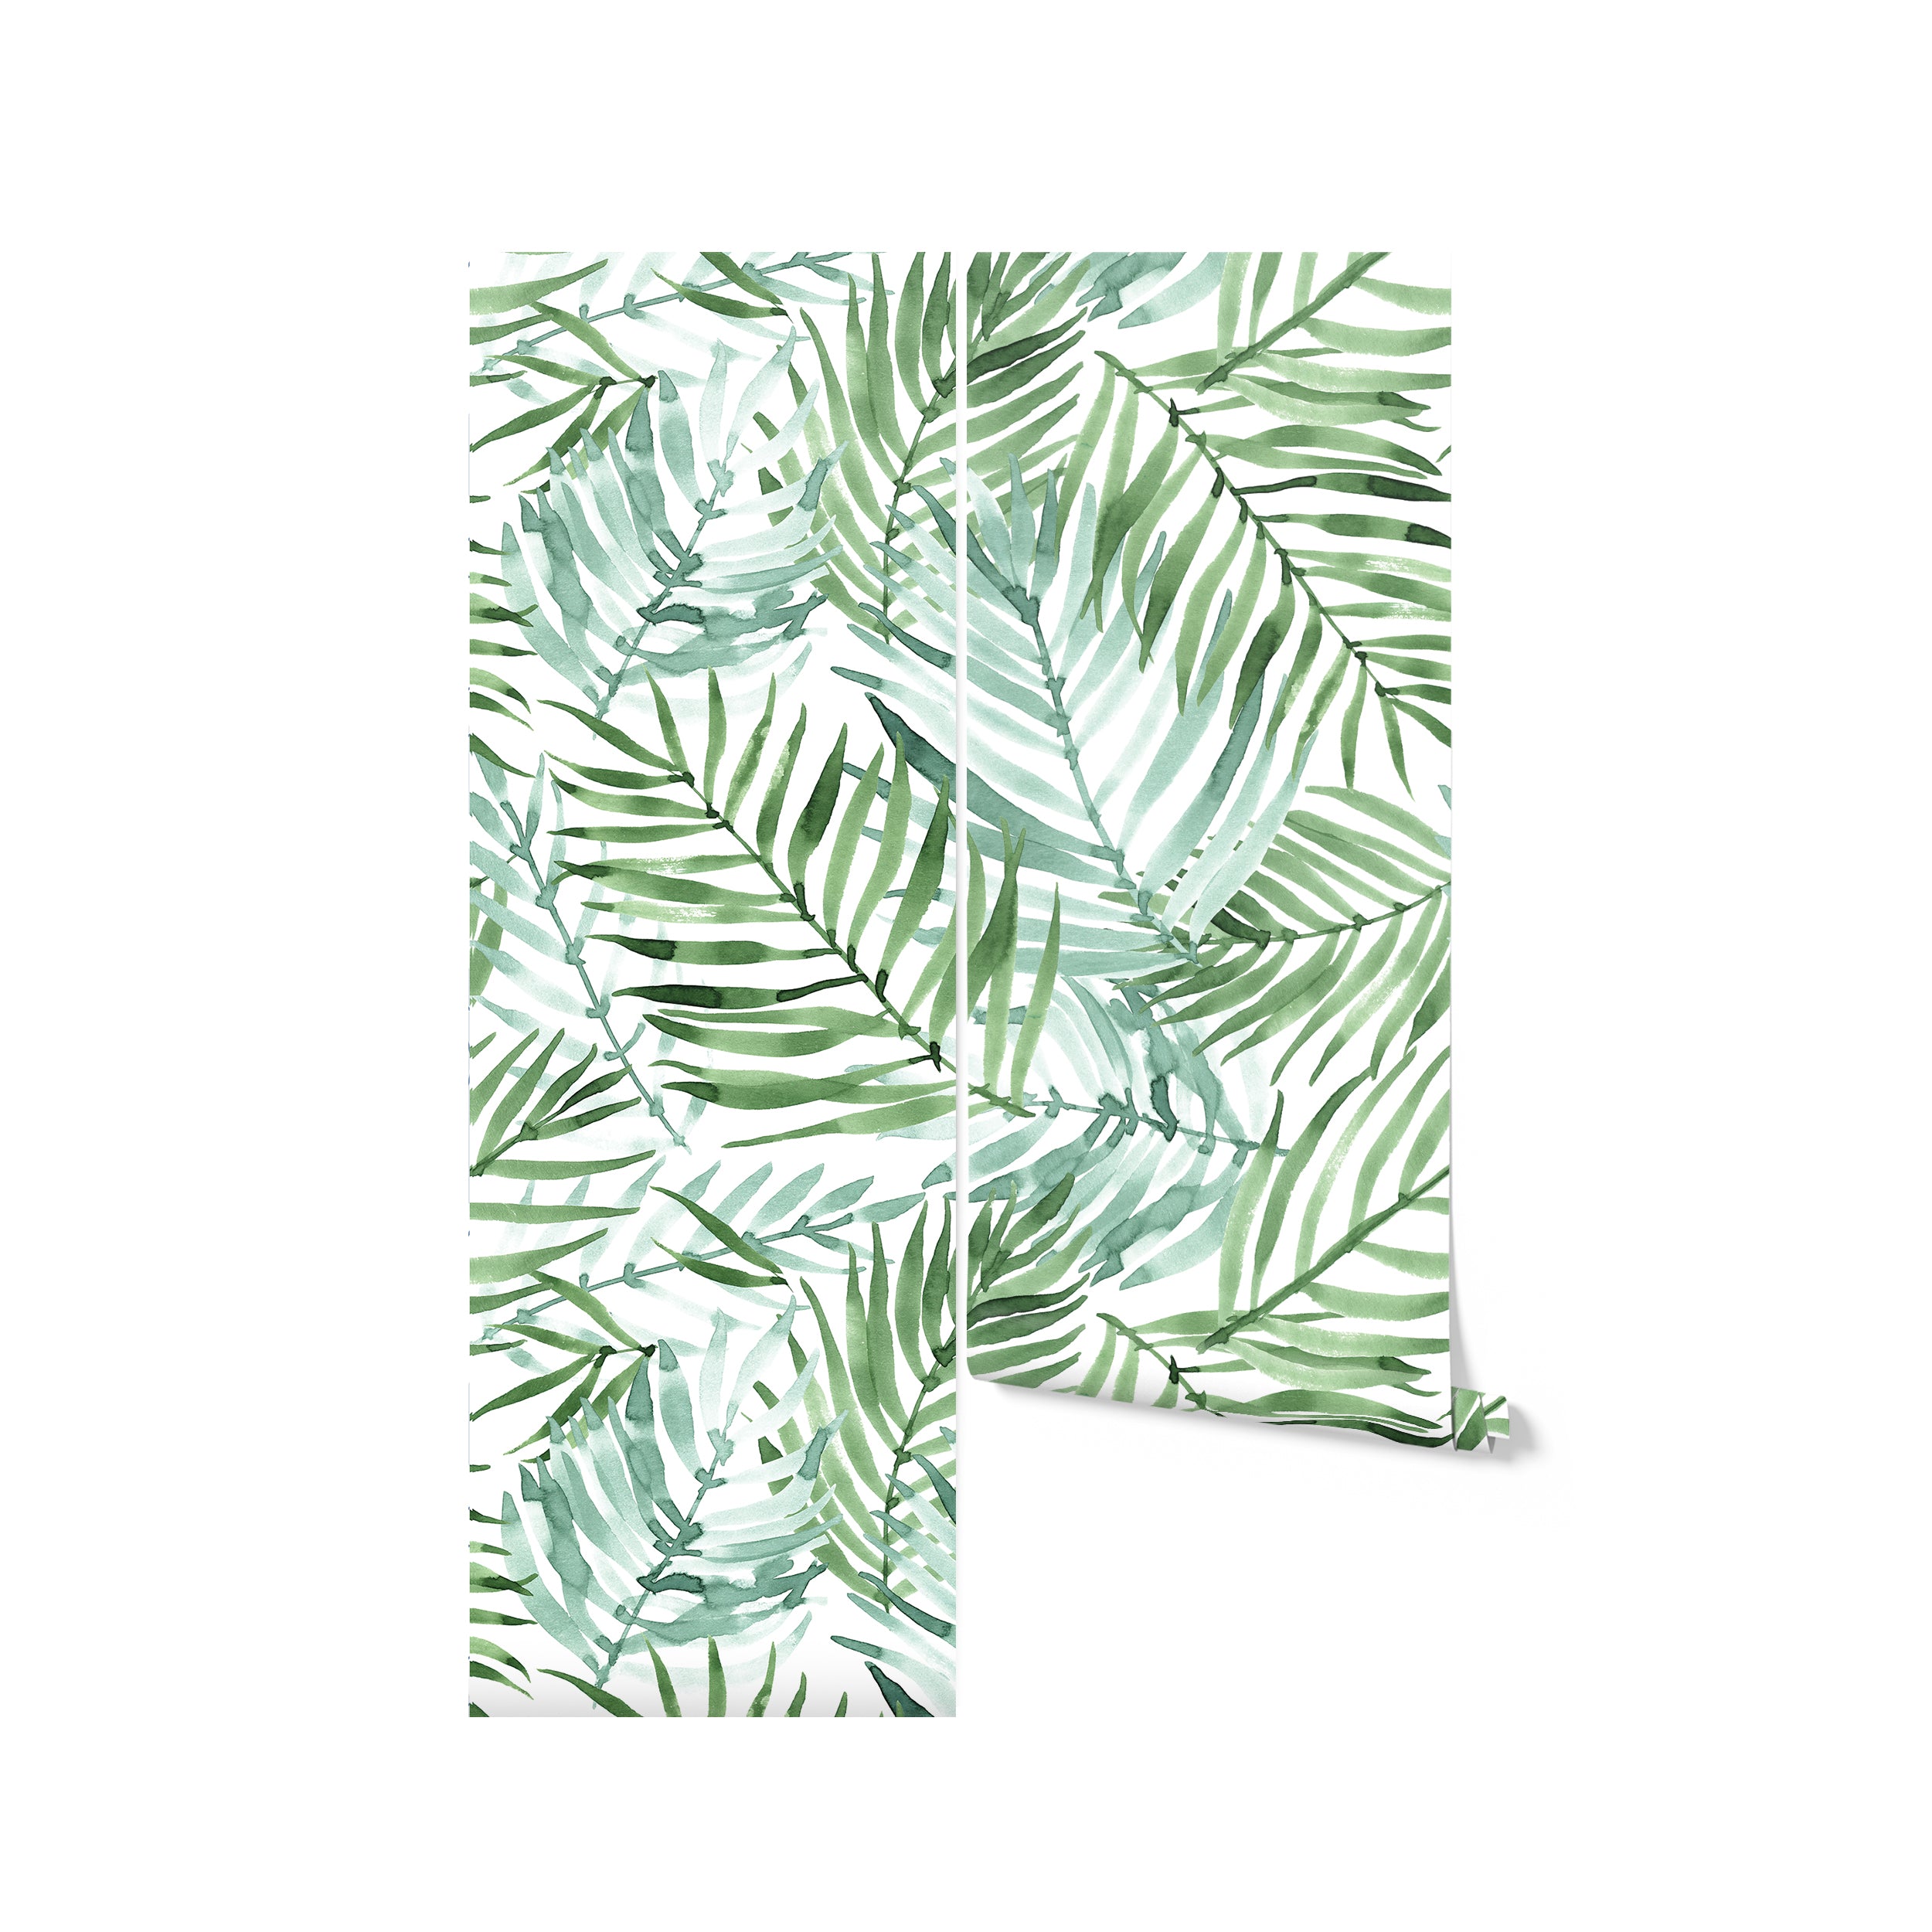 A partially unrolled roll of 'Hand Painted Tropical Wallpaper' leaning against a white background. The paper reveals a lively assortment of watercolor palm leaves in various shades of green, hinting at the wallpaper's potential to transform any room into a tropical escape.